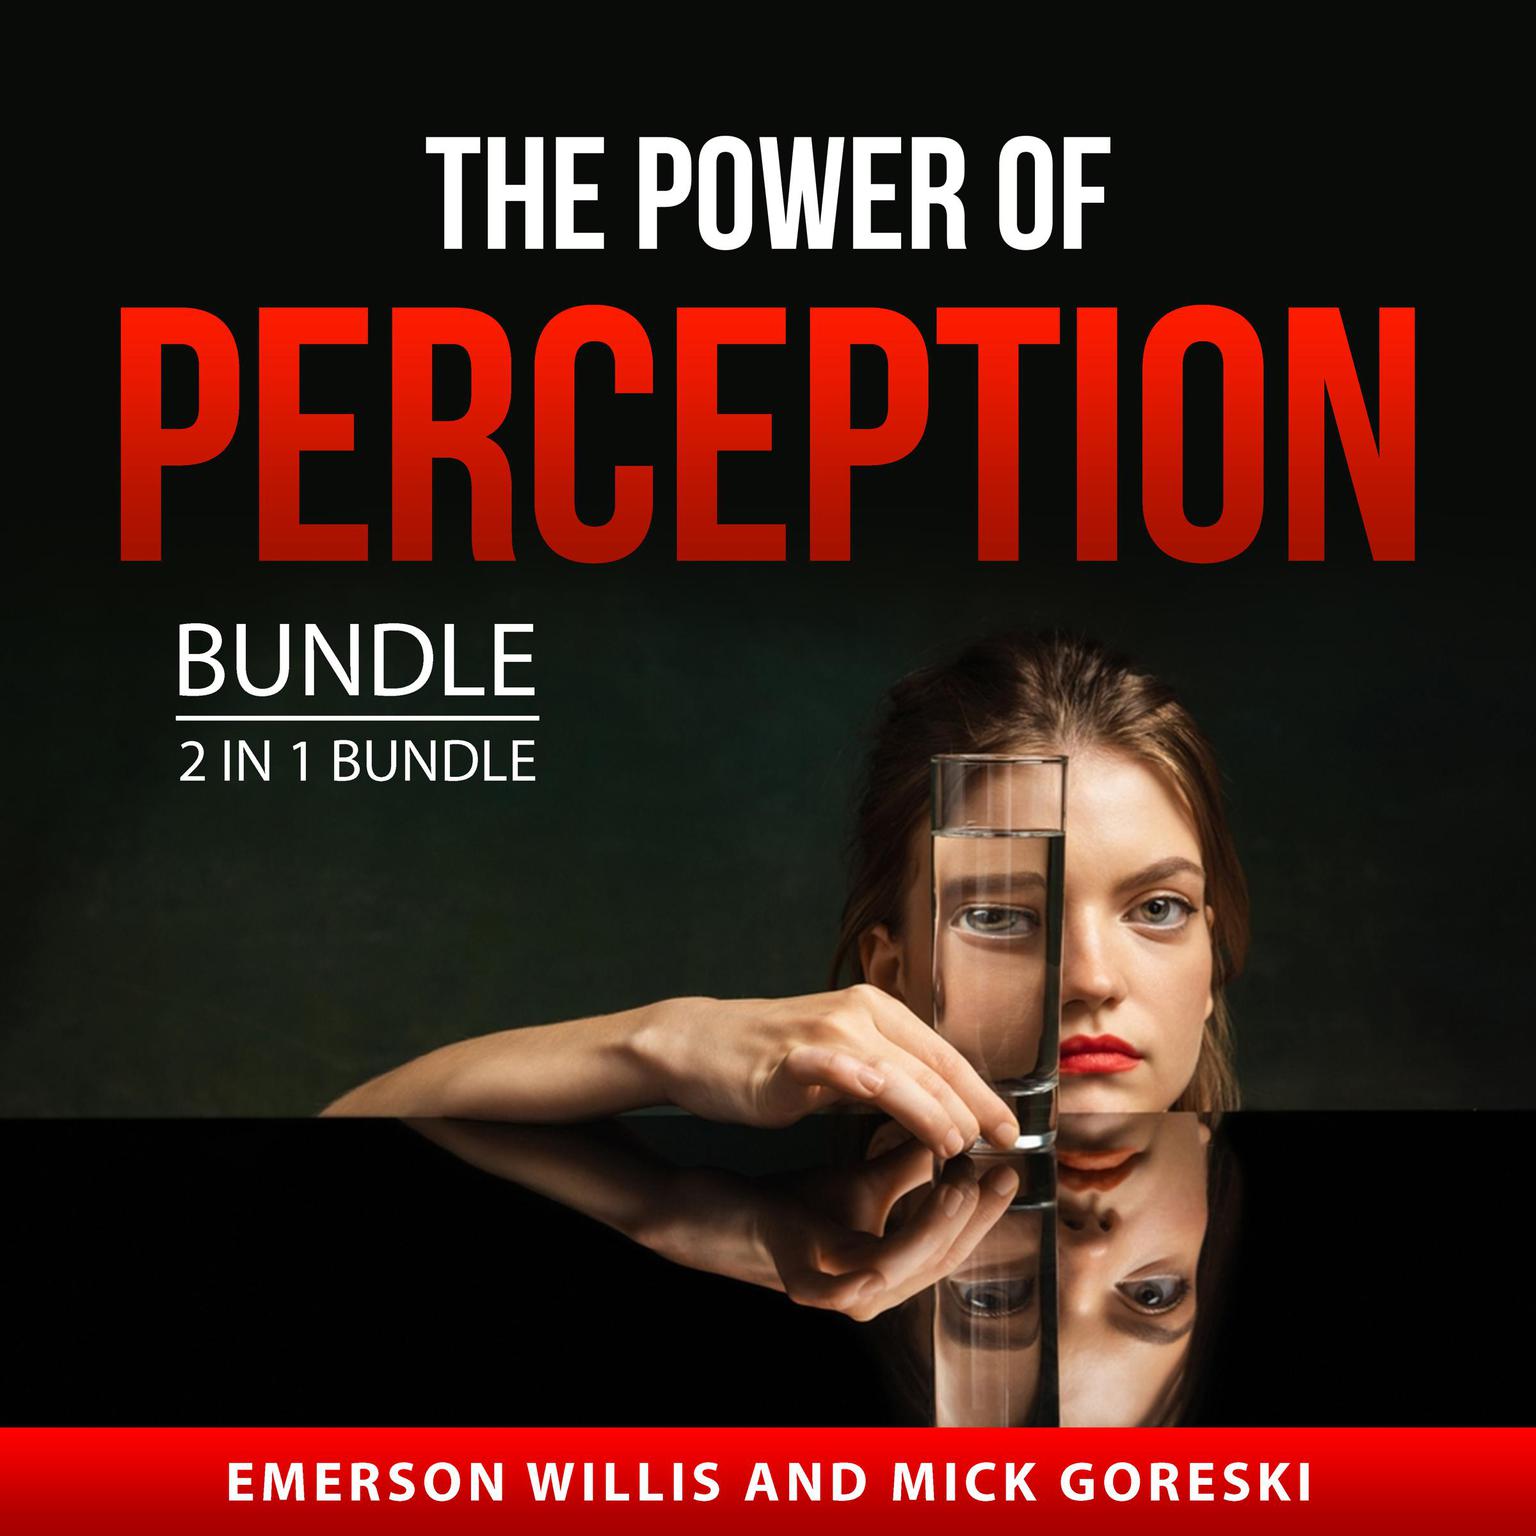 The Power of Perception Bundle, 2 in 1 Bundle Audiobook, by Emerson Willis